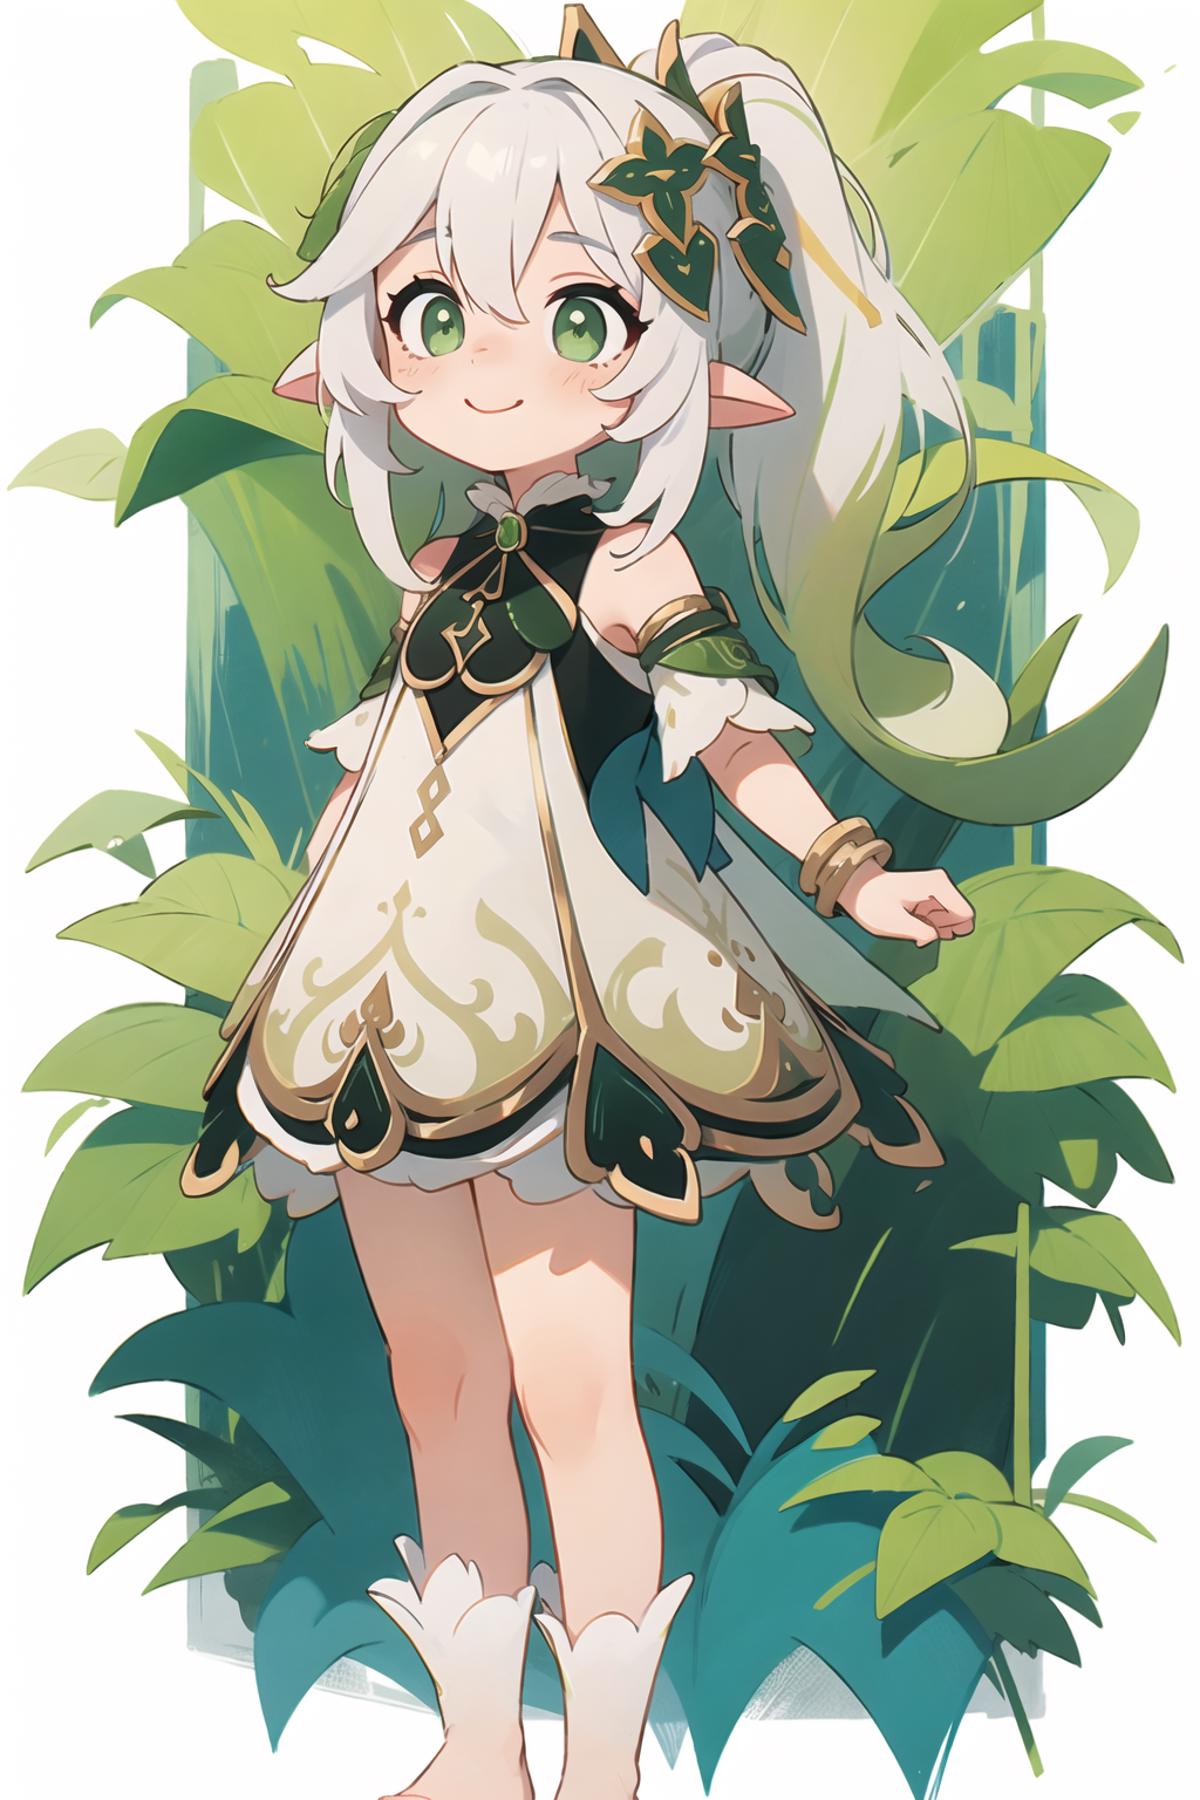 A cartoon character in a white dress and green hair standing in a jungle.